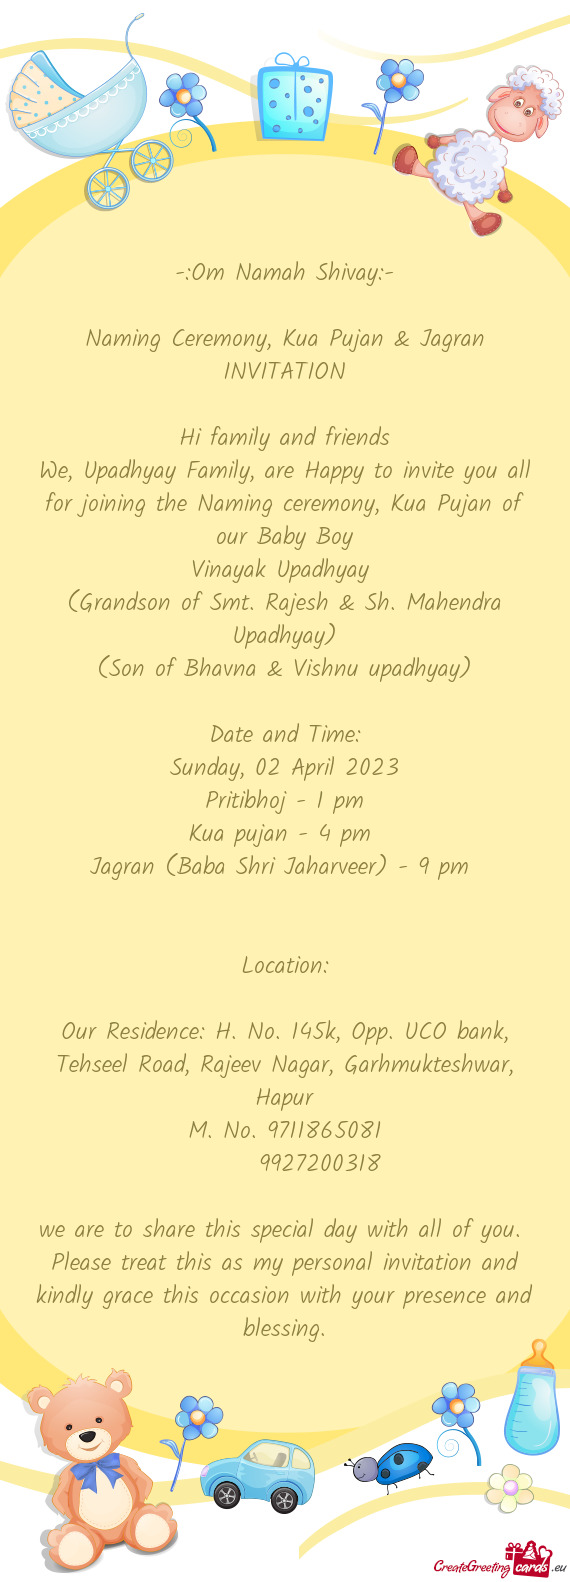 We, Upadhyay Family, are Happy to invite you all for joining the Naming ceremony, Kua Pujan of our B